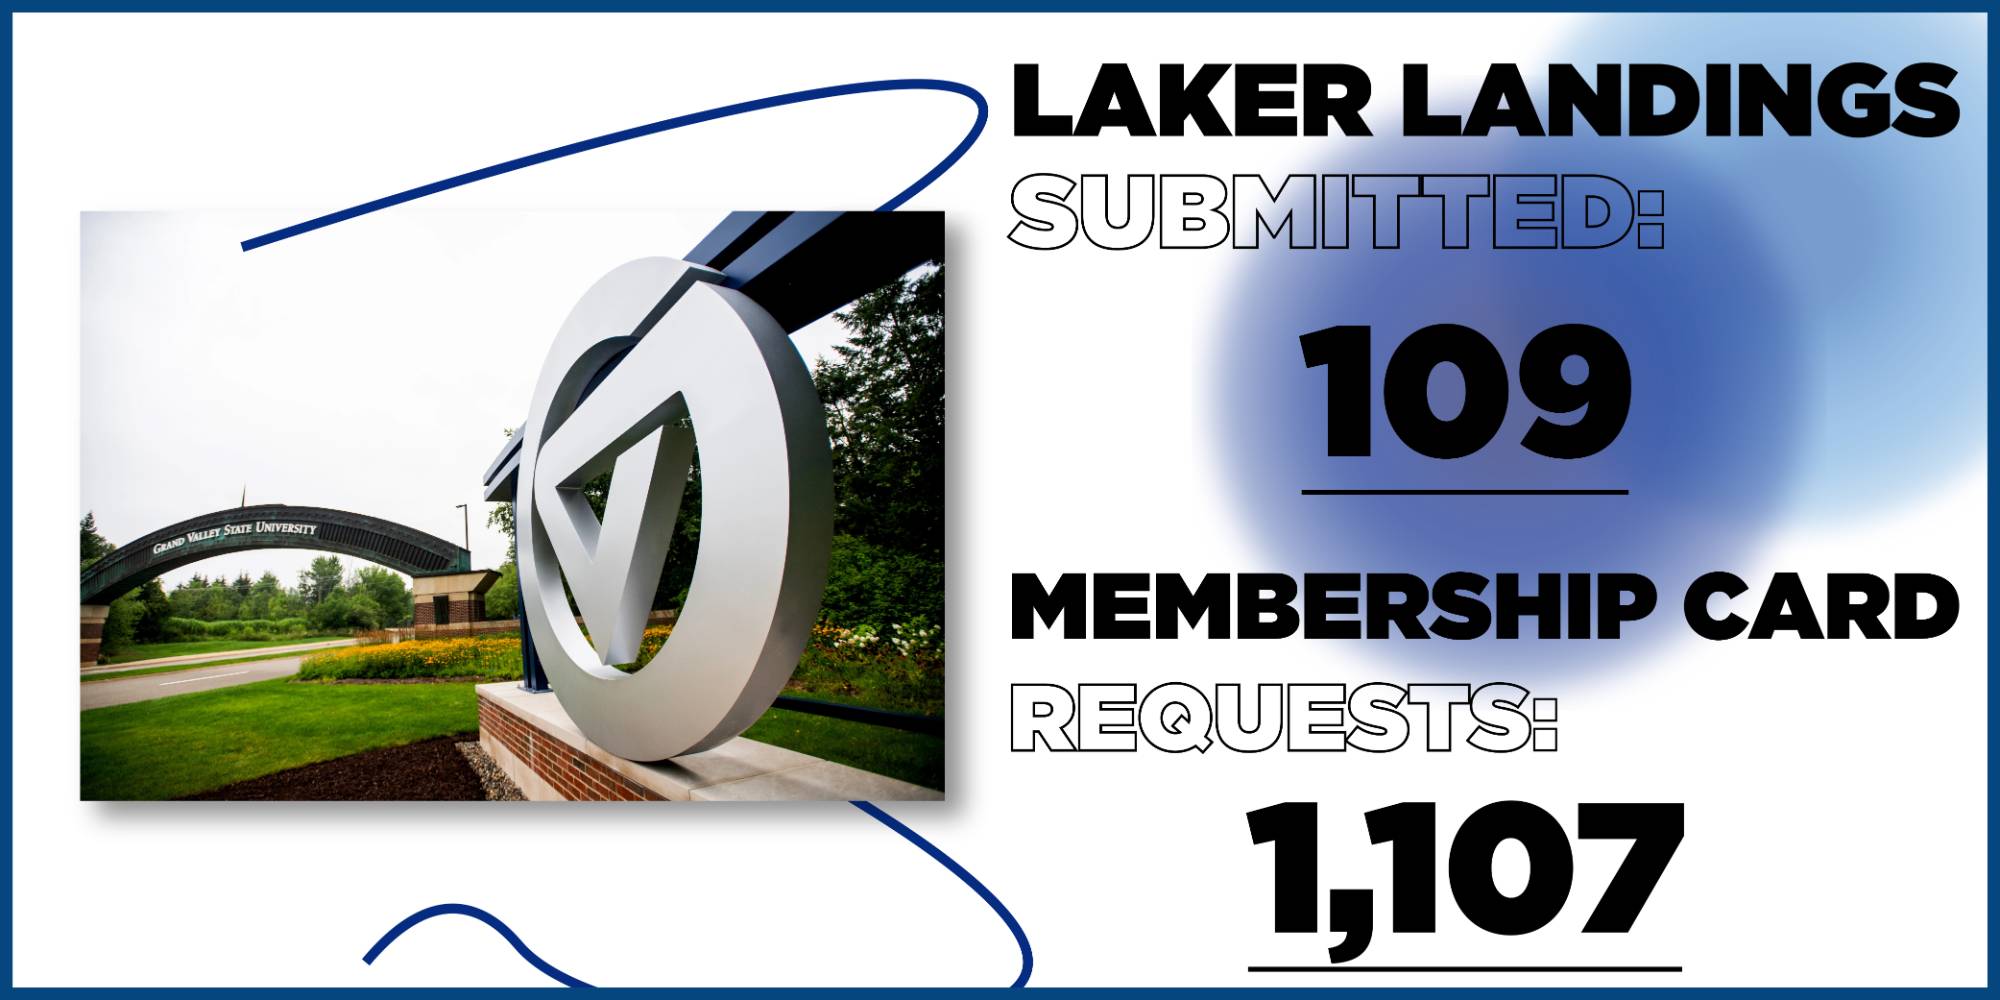 There have been a total of 109 Laker Landings submitted, and 1,107 membership card requests. This data is displayed on the right side of an image of the new campus sign, by the welcome arch.